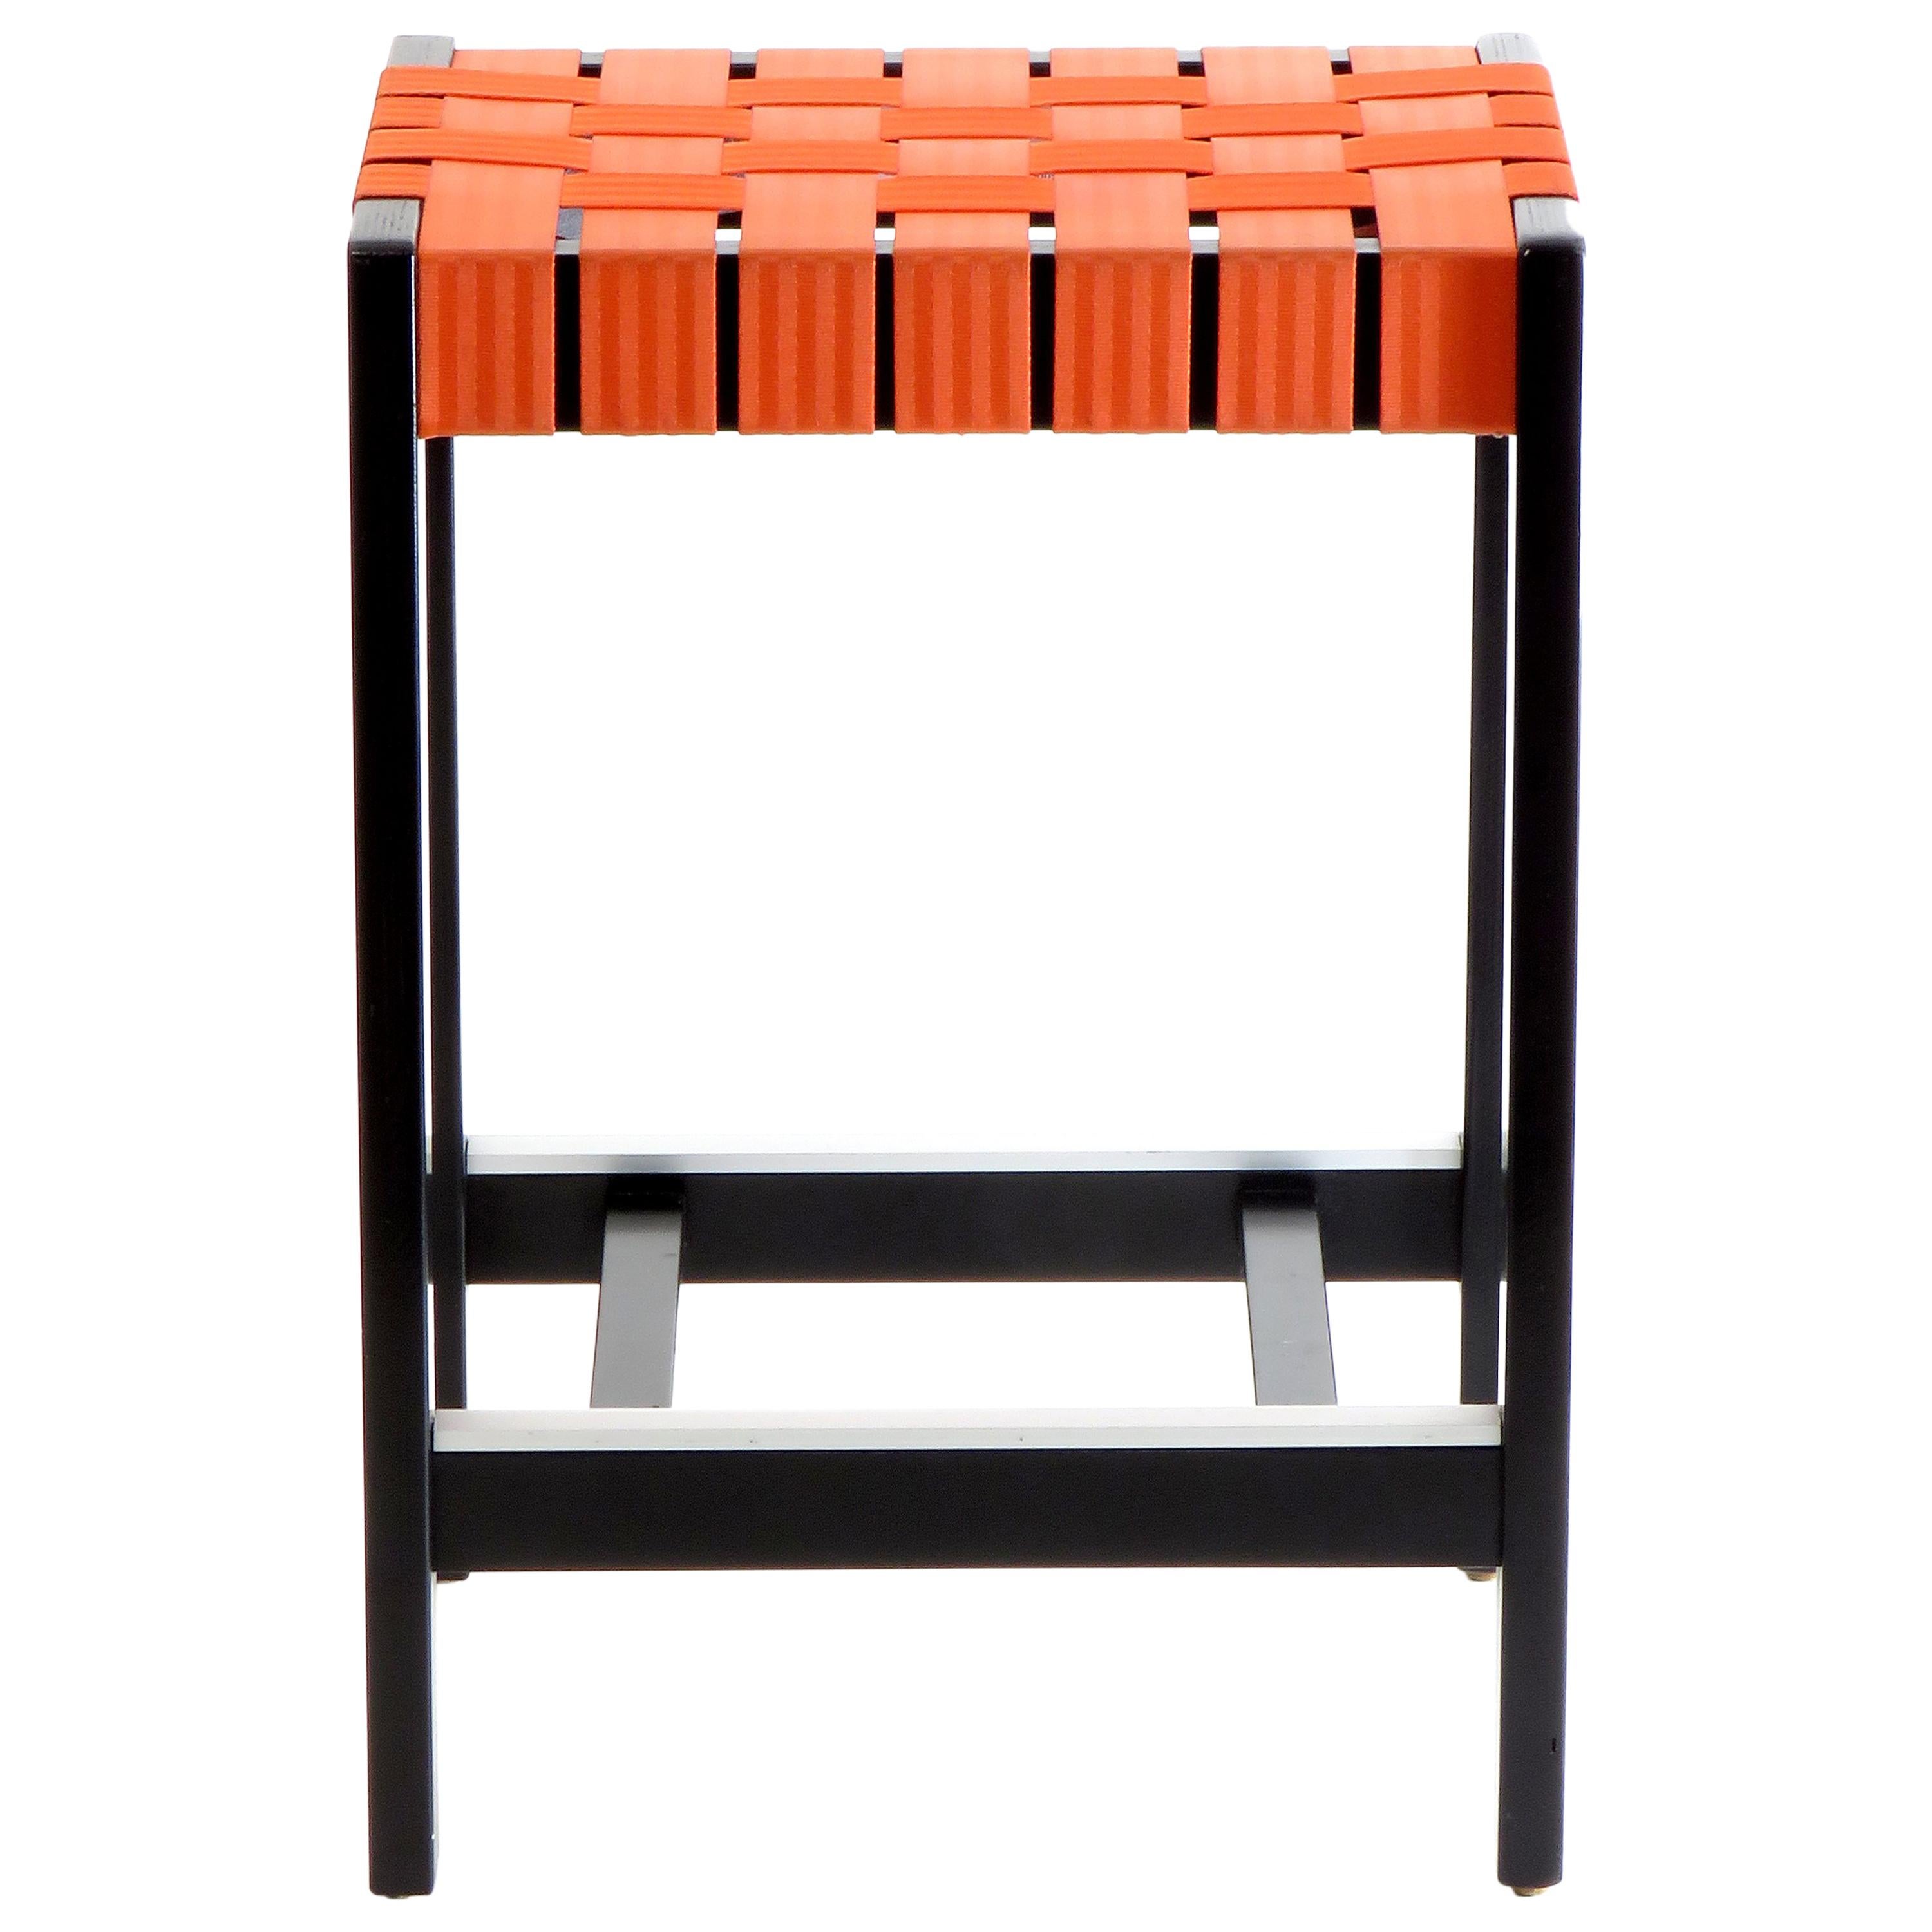 Maple Black Finish Bar Stool with Orange Woven Seat Made in USA by Peter Danko im Angebot